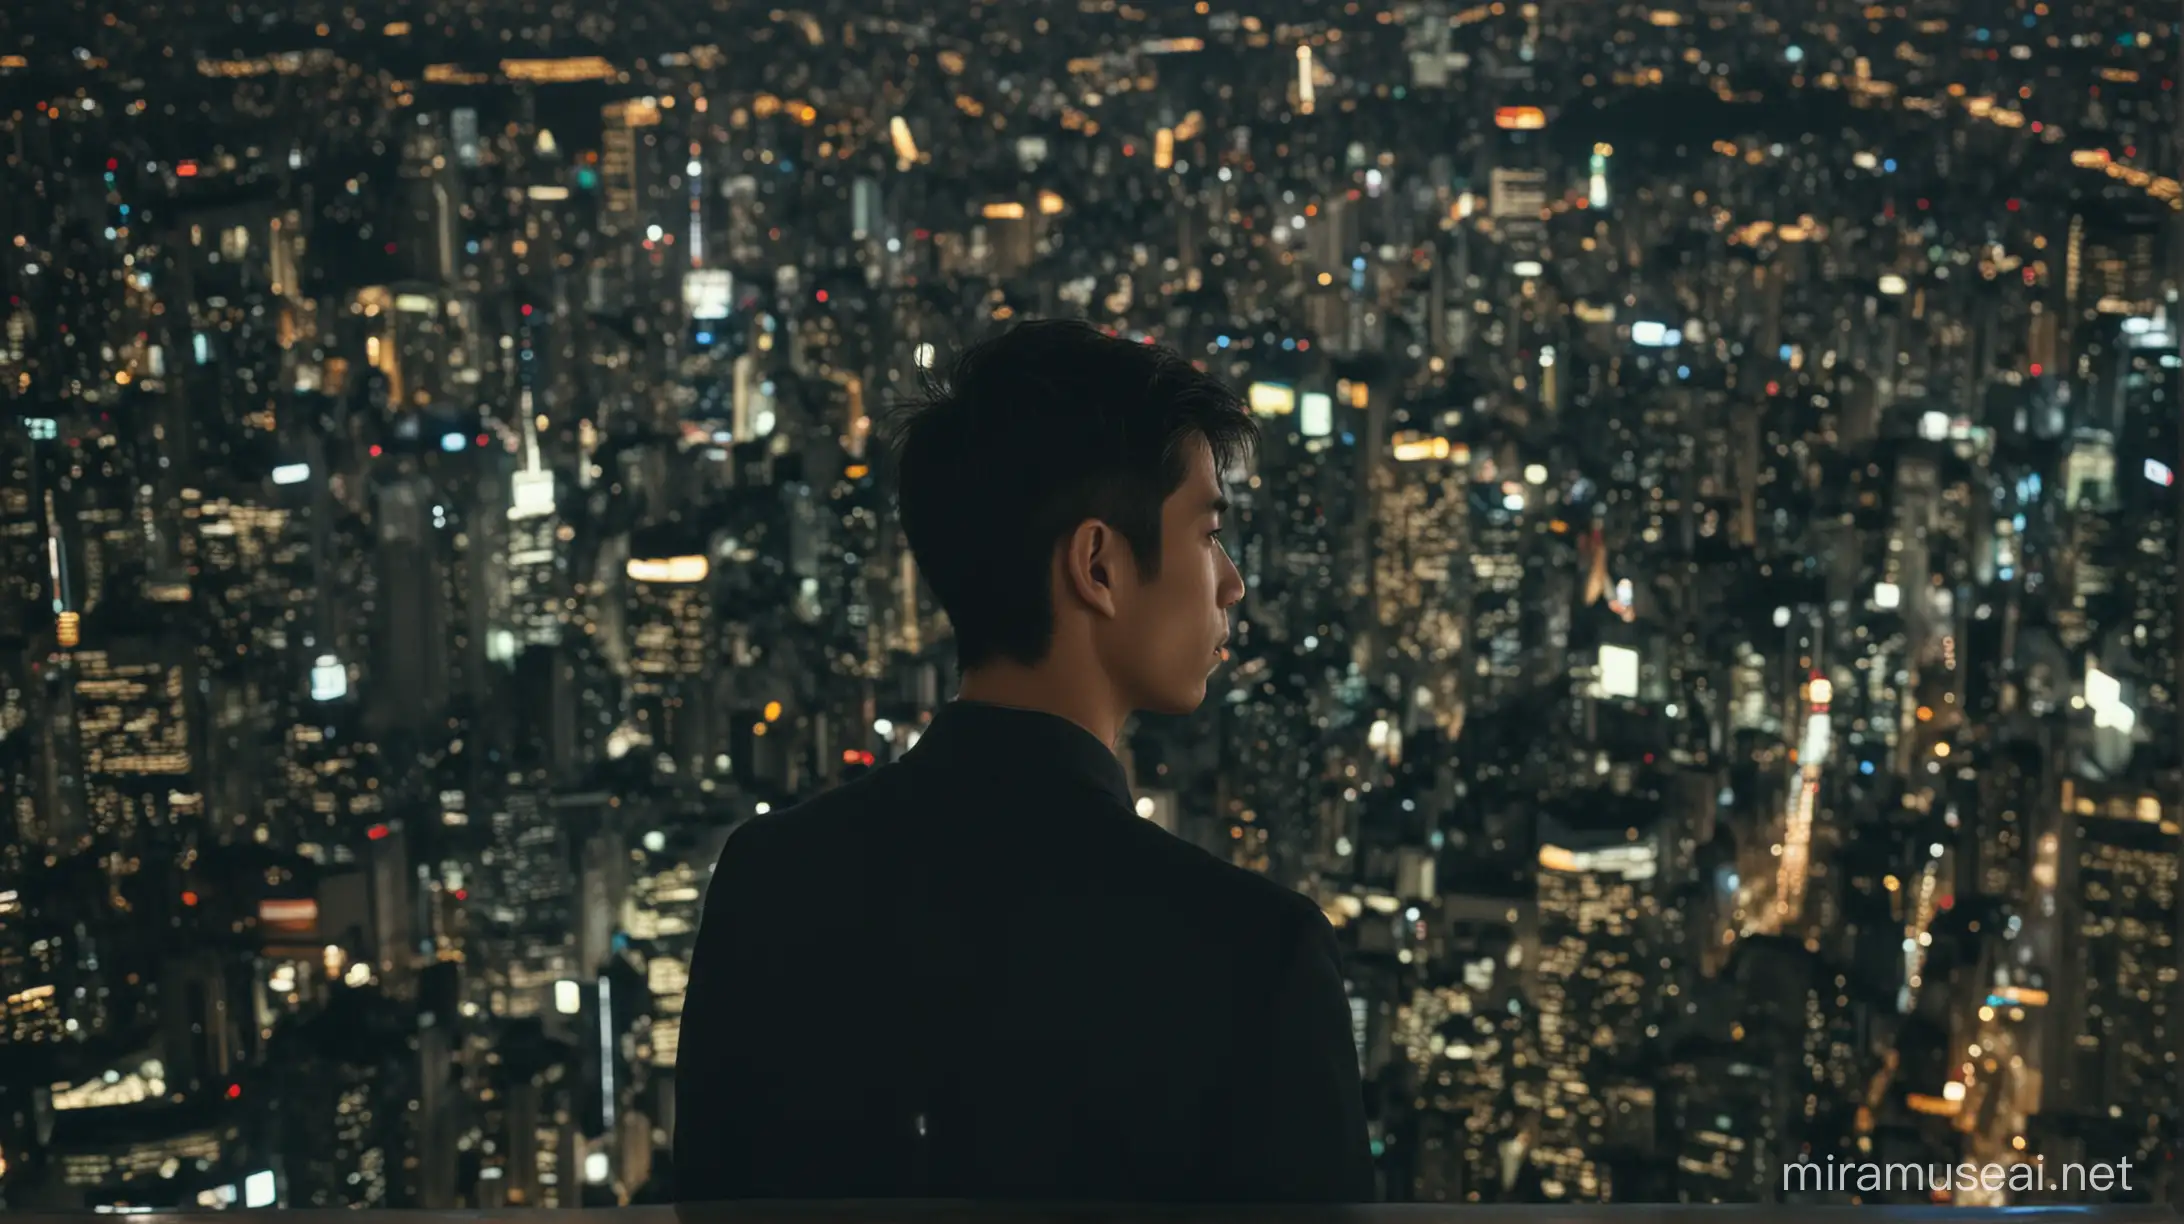 The young man looks to night tokio From the height of a skyscraper. Tall shining skyscrapers in the background . Shot on an 85mm lens. Depth of field: 1.8